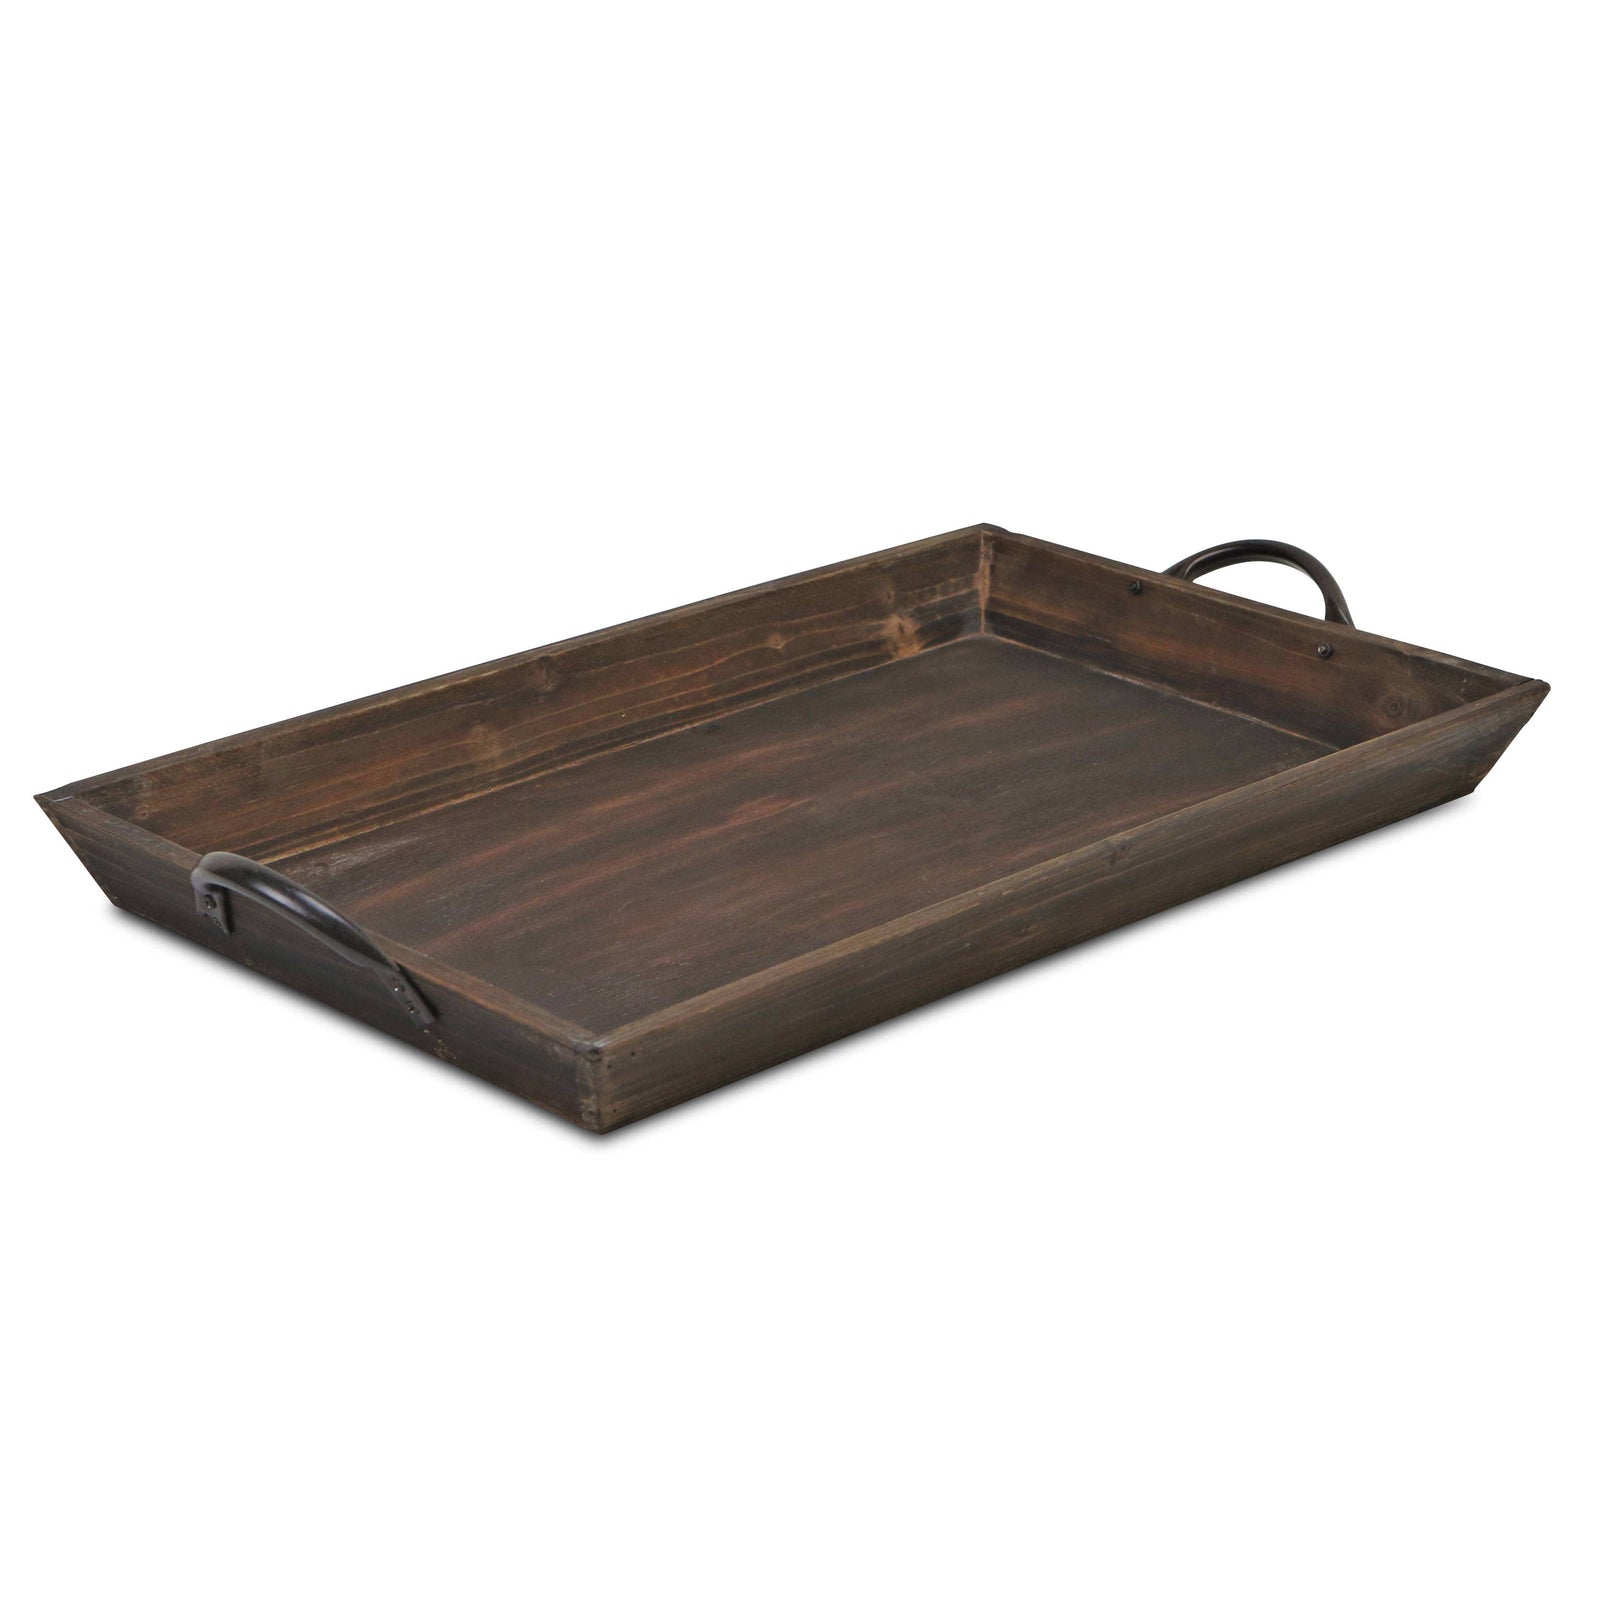 Brown Finish Wooden Rustic Tray Adorned Metal Handles